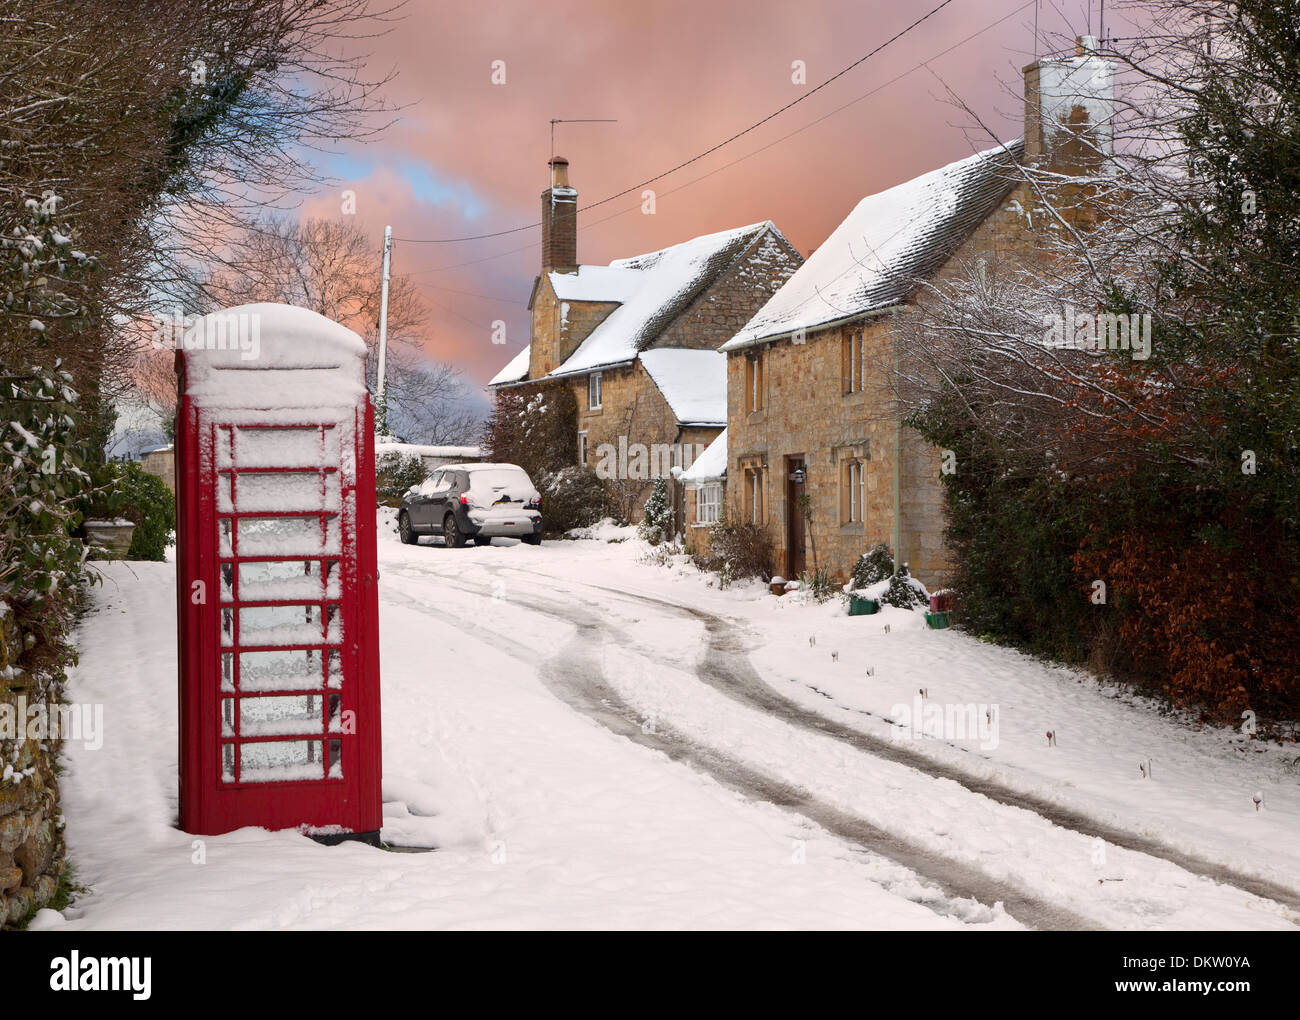 Red phone box and cottages in snow, Cotswolds, Gloucestershire, England. Stock Photo